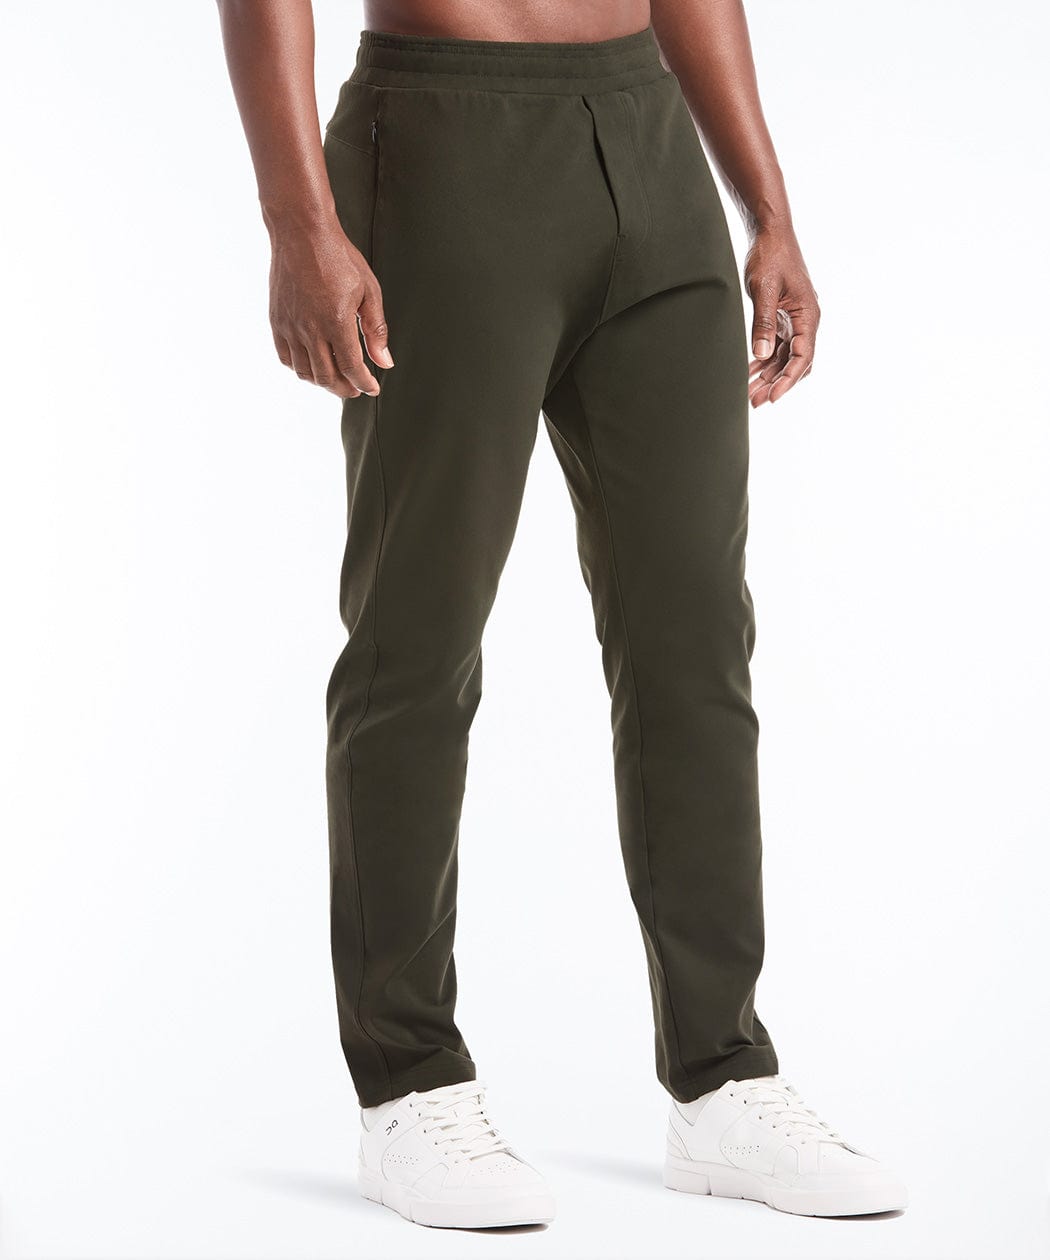 Casual Spring Travel Outfit with Utility Jogger Pants  Fashion joggers,  Travel outfits spring, Olive jogger pants